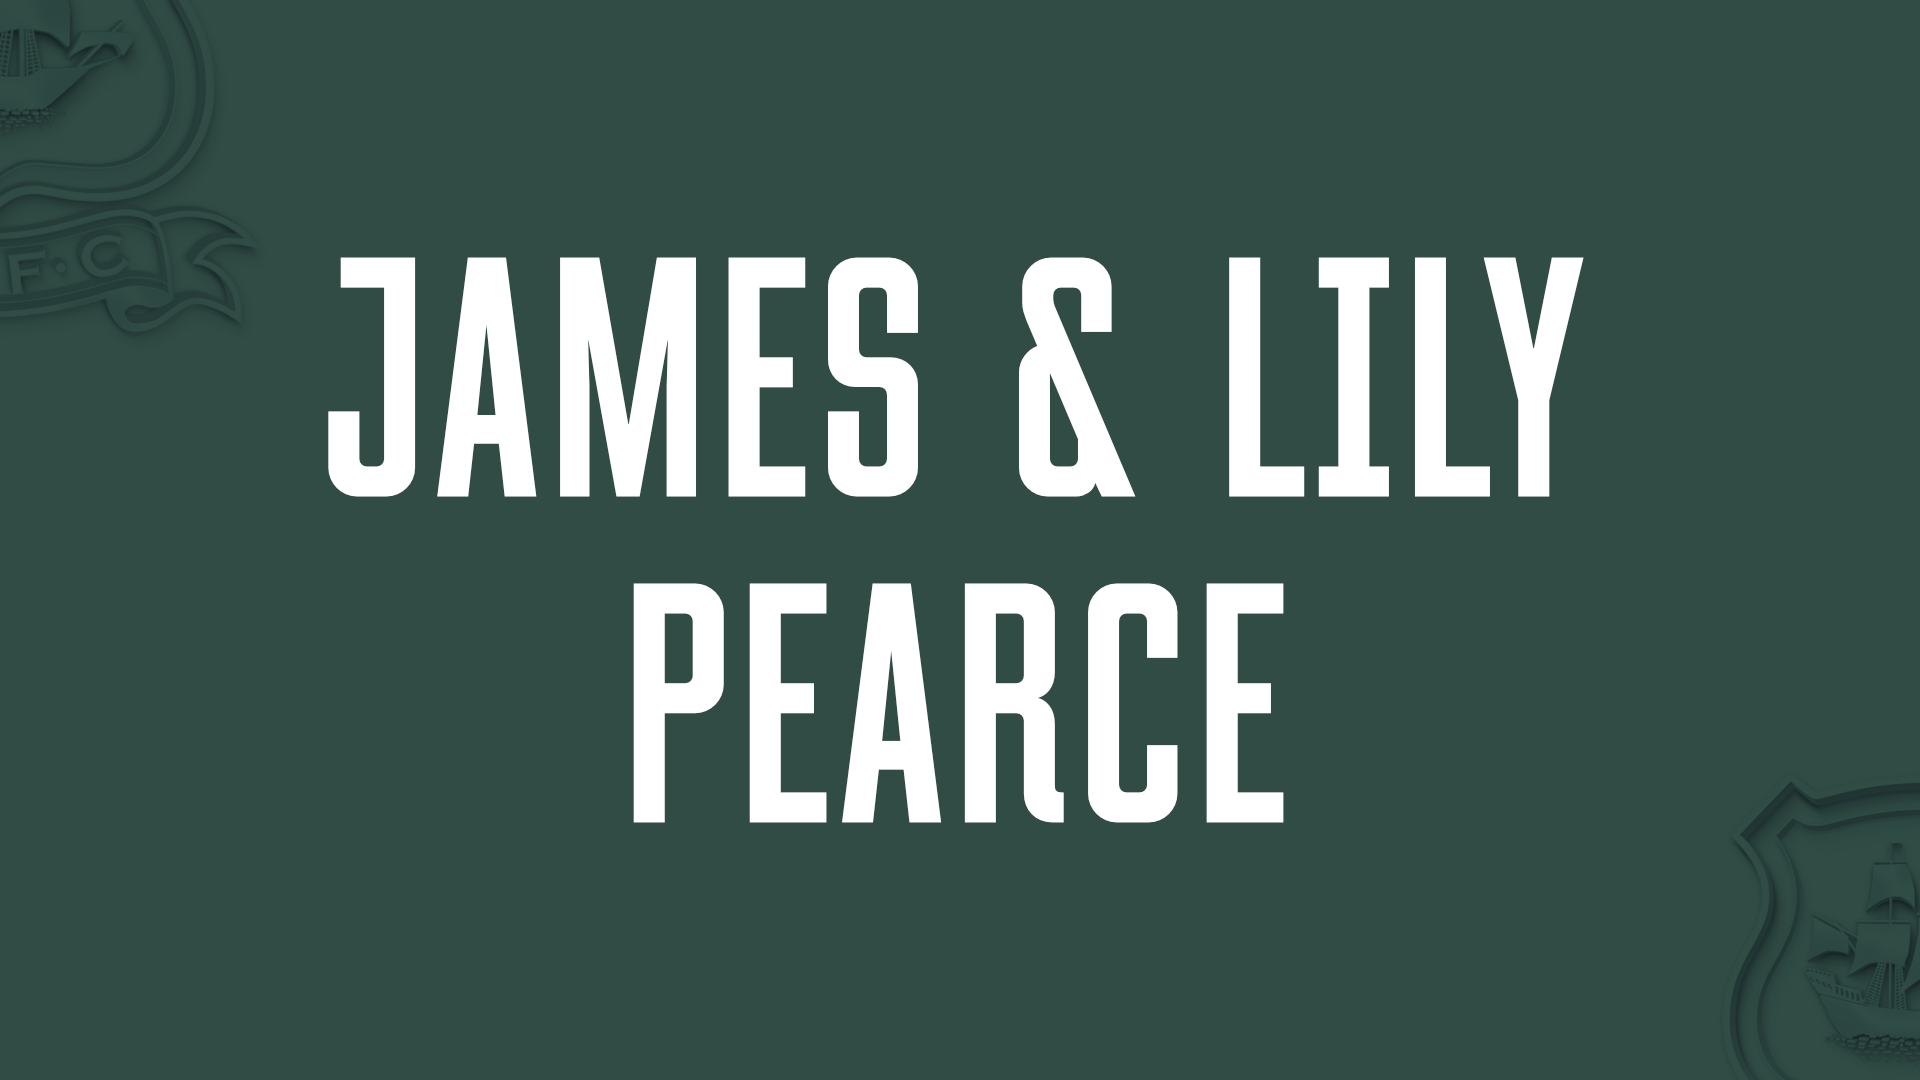 james and lily pearce.png